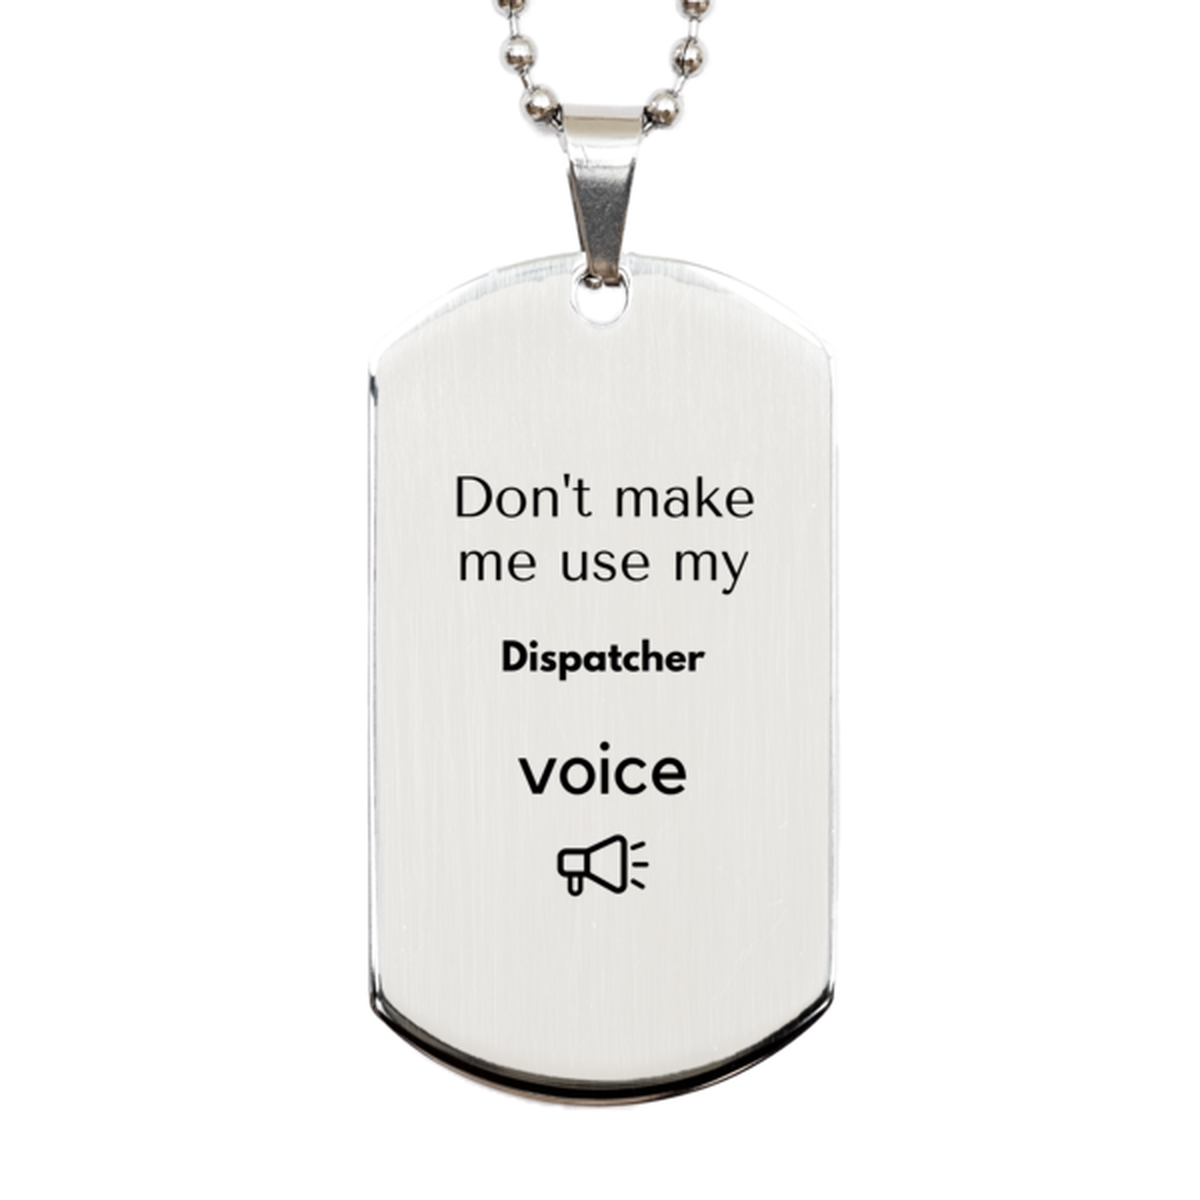 Don't make me use my Dispatcher voice, Sarcasm Dispatcher Gifts, Christmas Dispatcher Silver Dog Tag Birthday Unique Gifts For Dispatcher Coworkers, Men, Women, Colleague, Friends